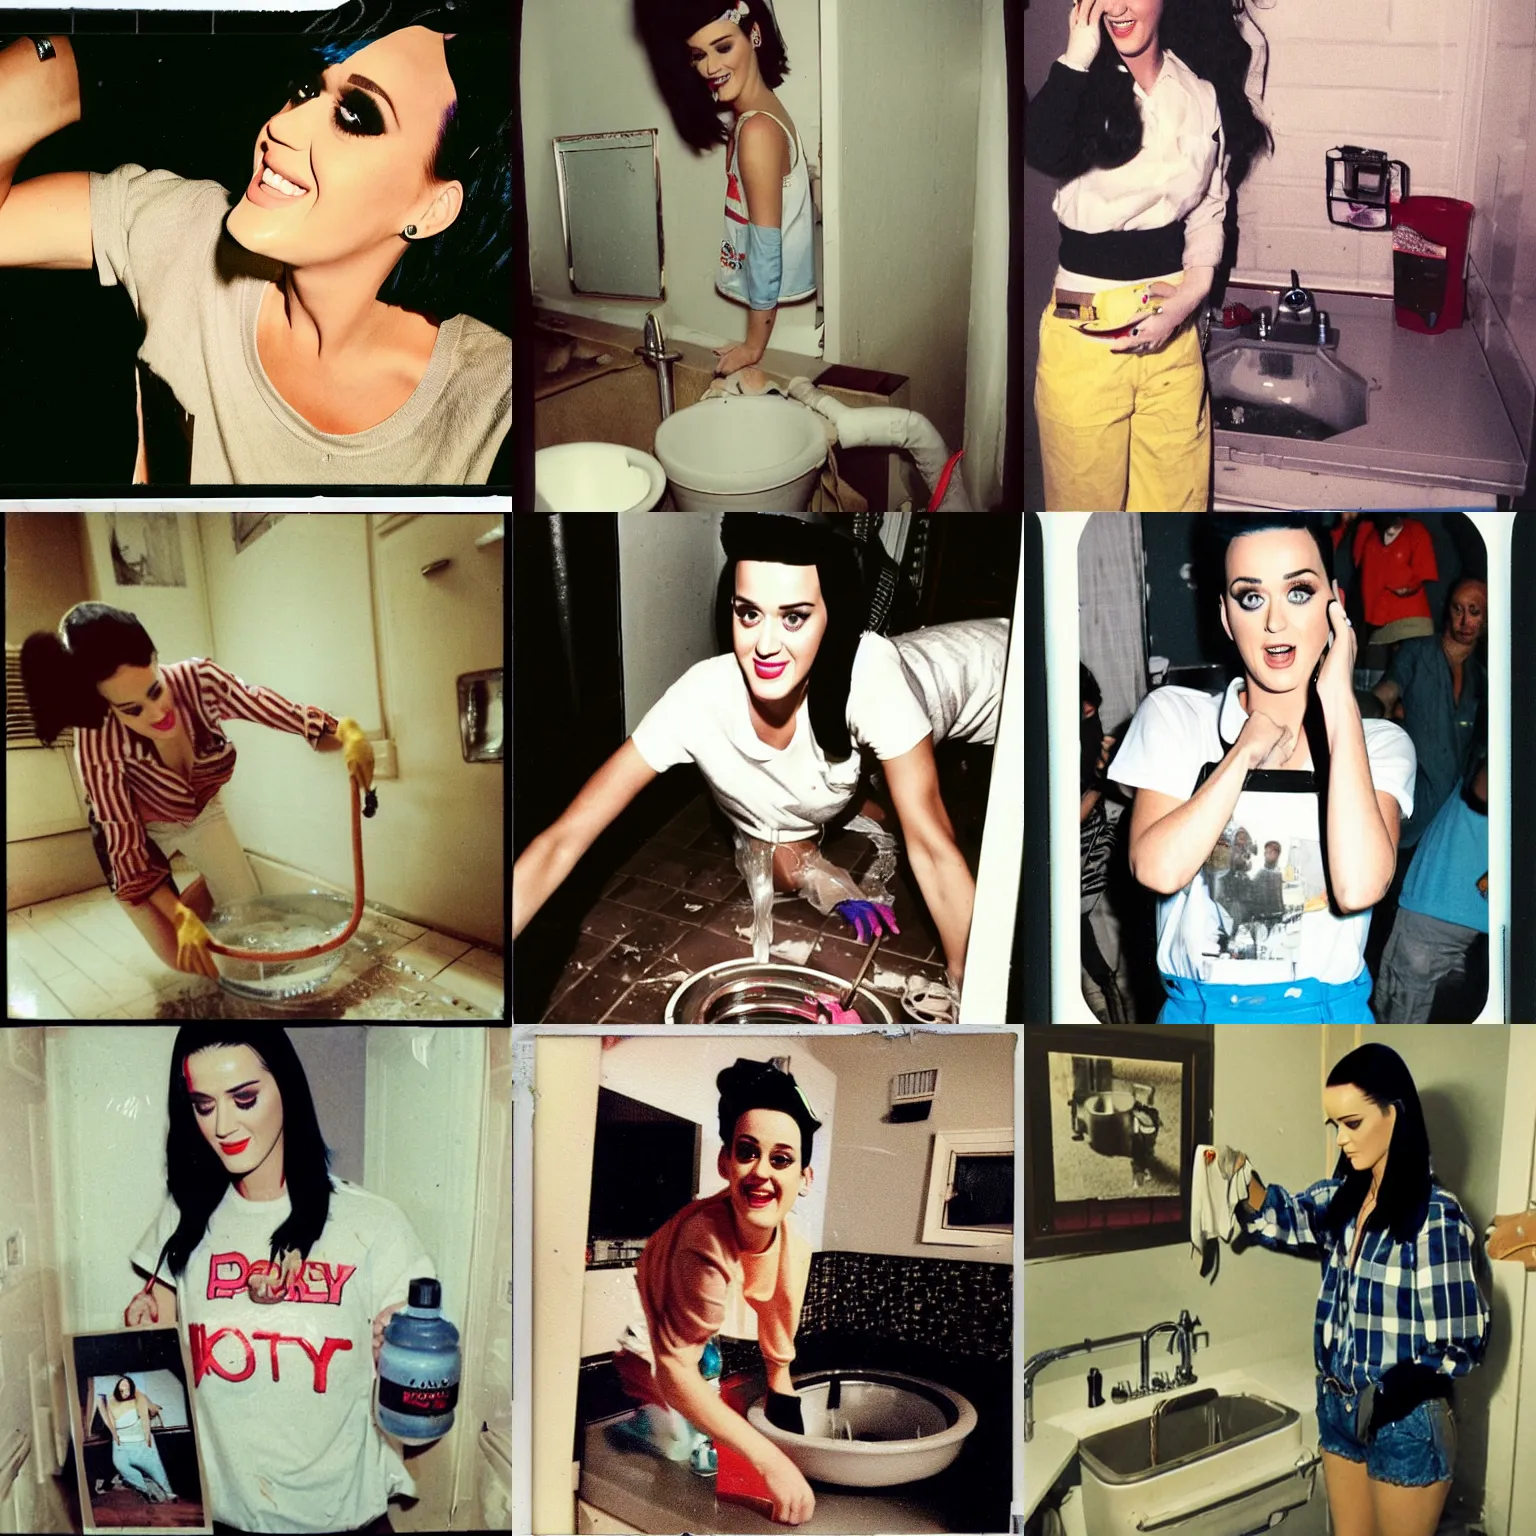 Prompt: katy perry fixing a leaking sink, wearing old shirt, puddle of water on the floor, polaroid photo